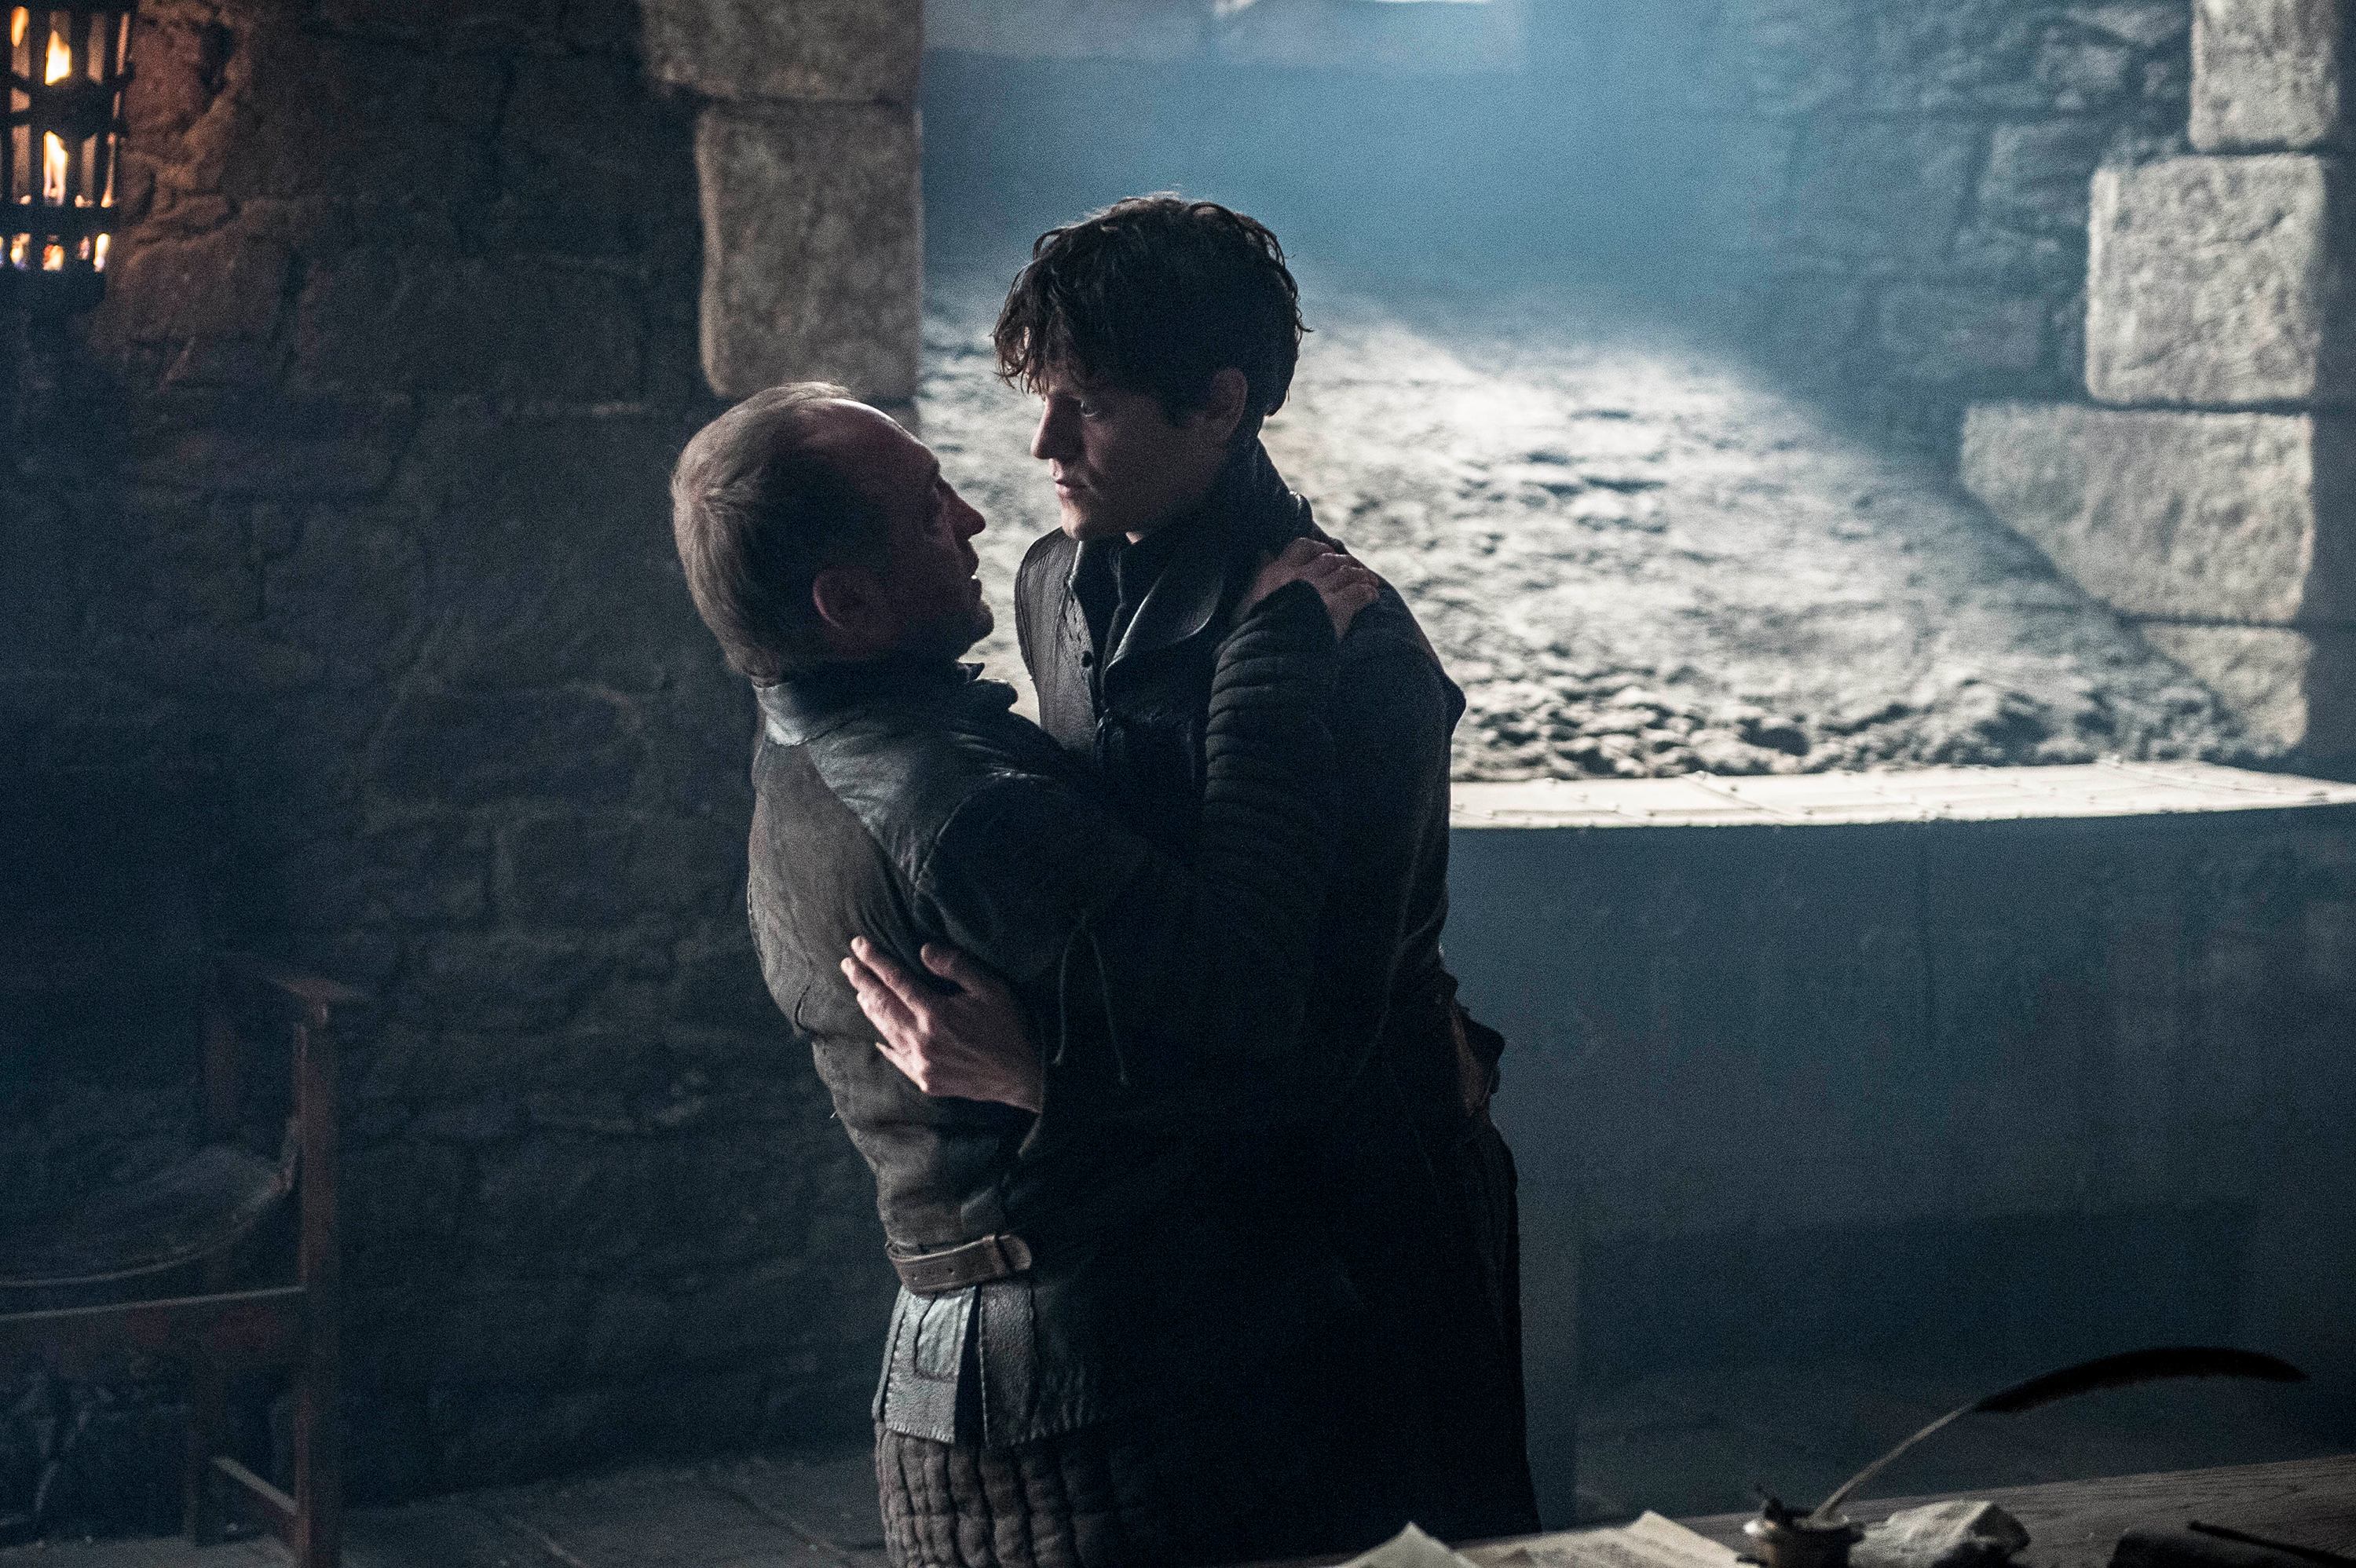 ramsay bolton, tv show, game of thrones, iwan rheon, roose bolton